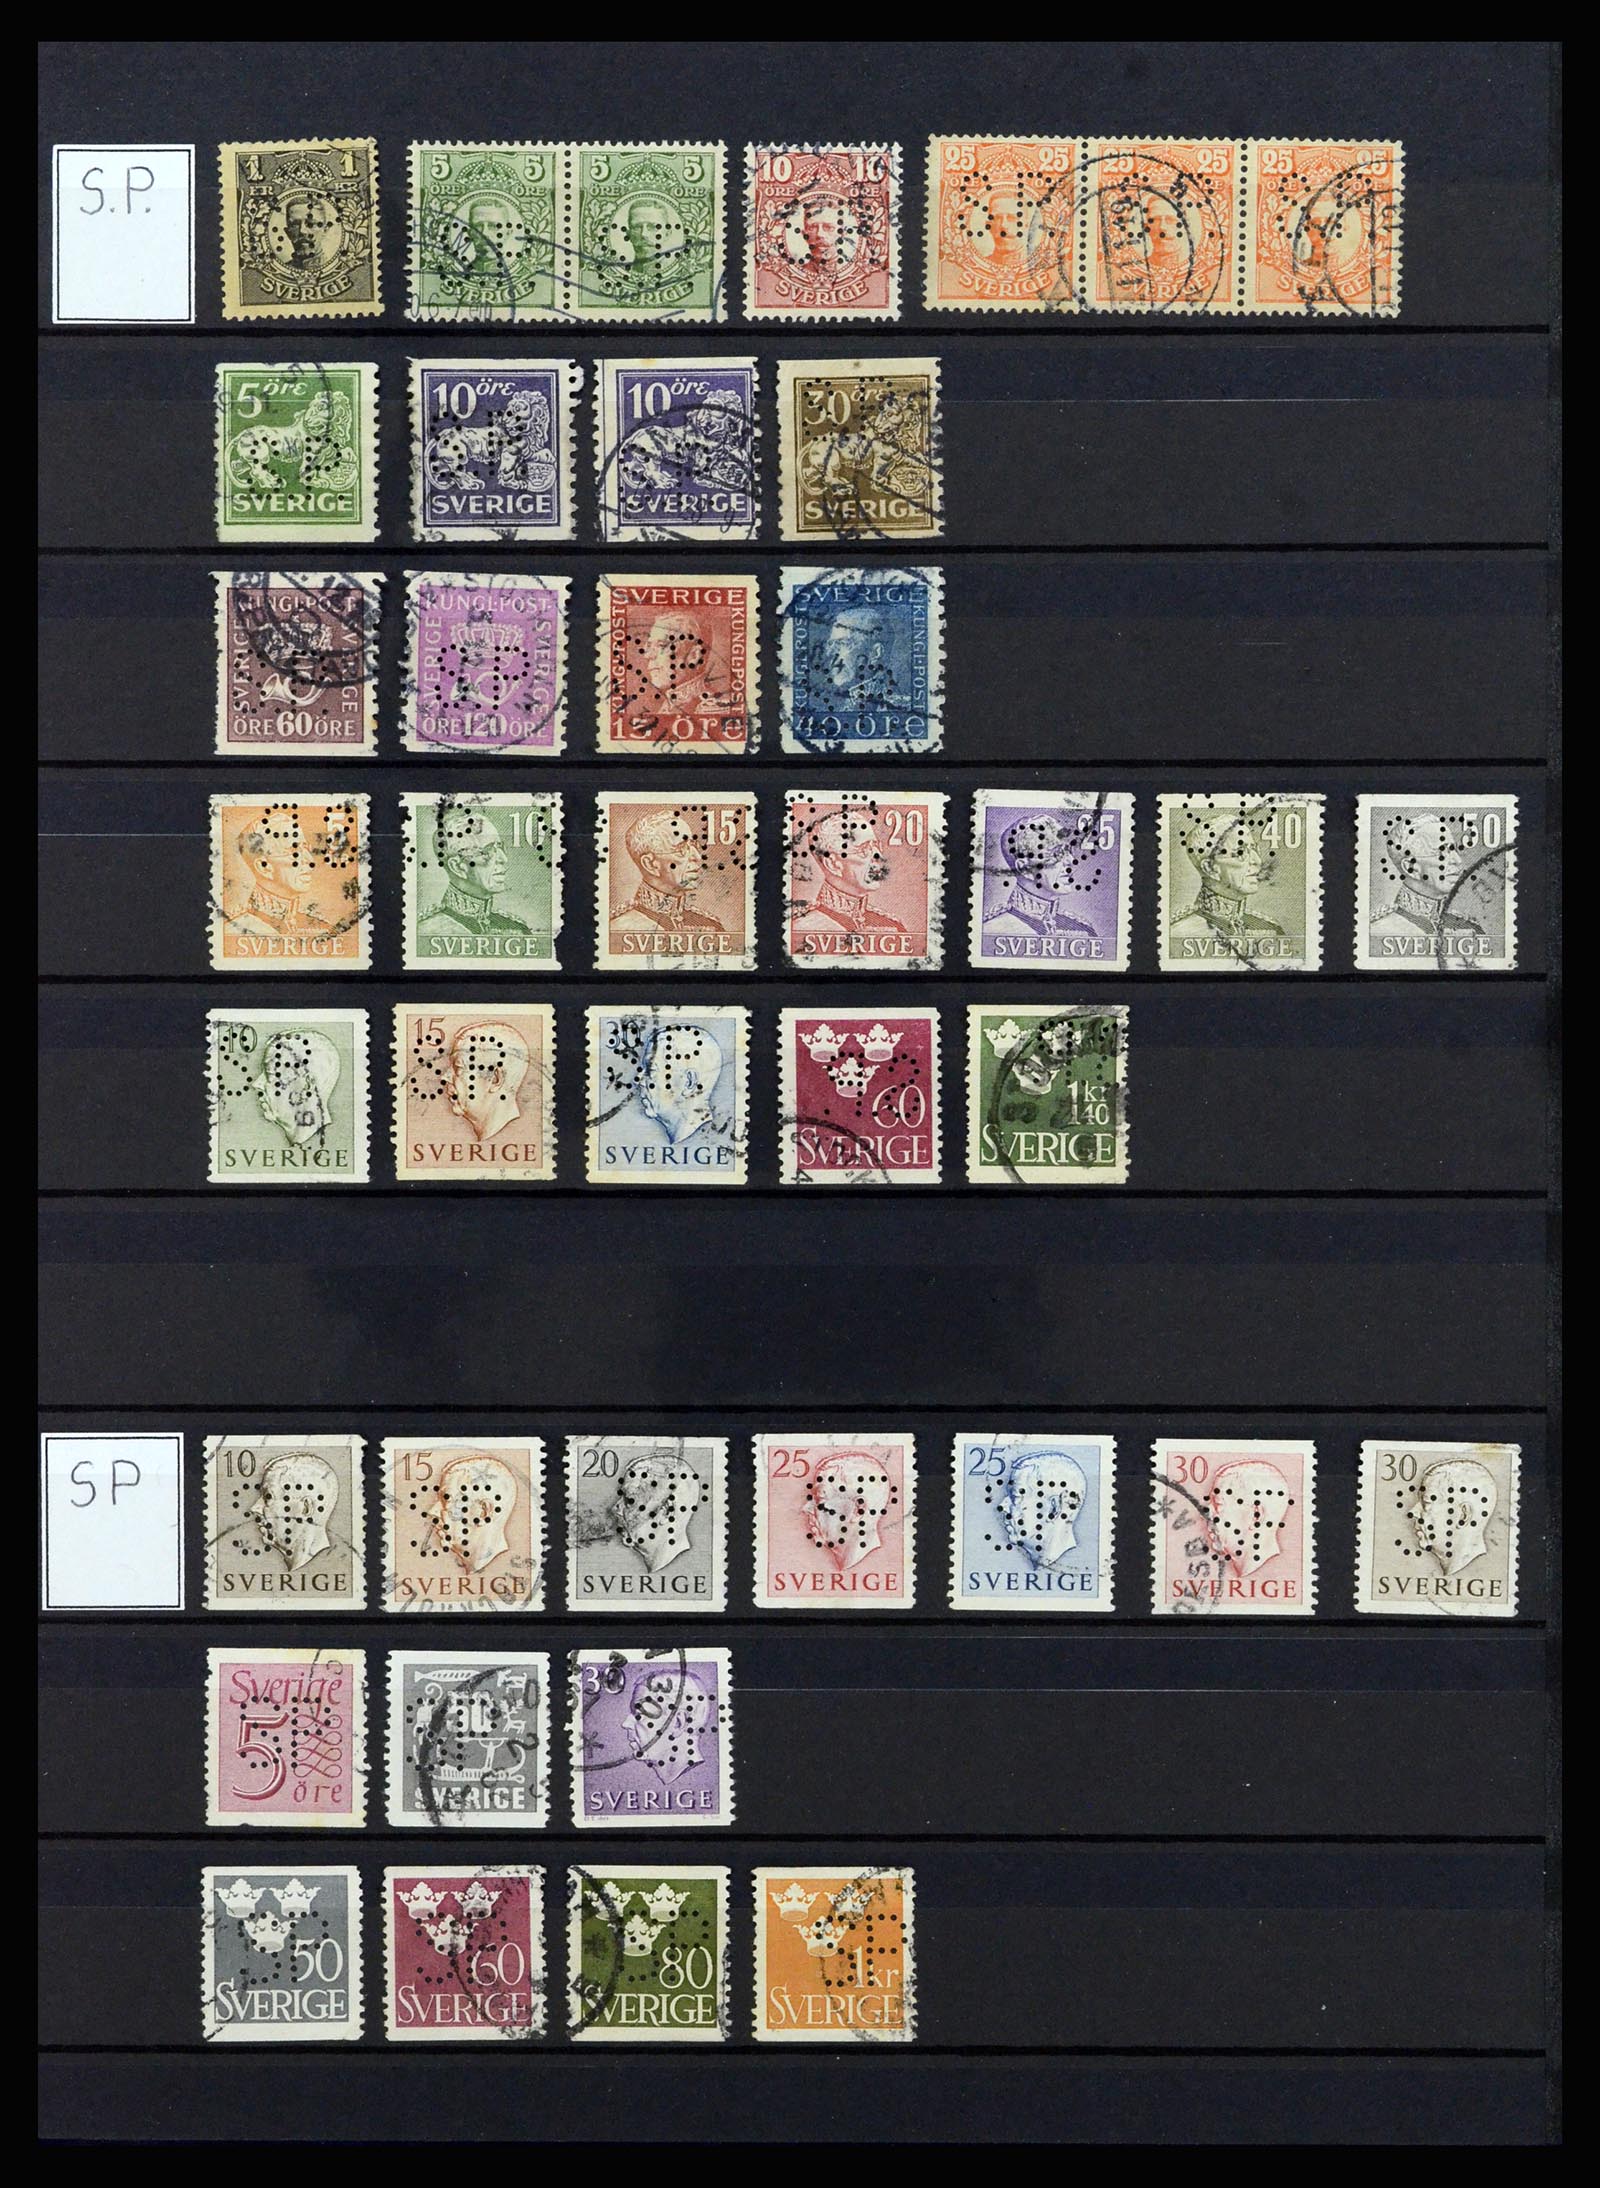 37057 072 - Stamp collection 37057 World perfins 1880-1950.